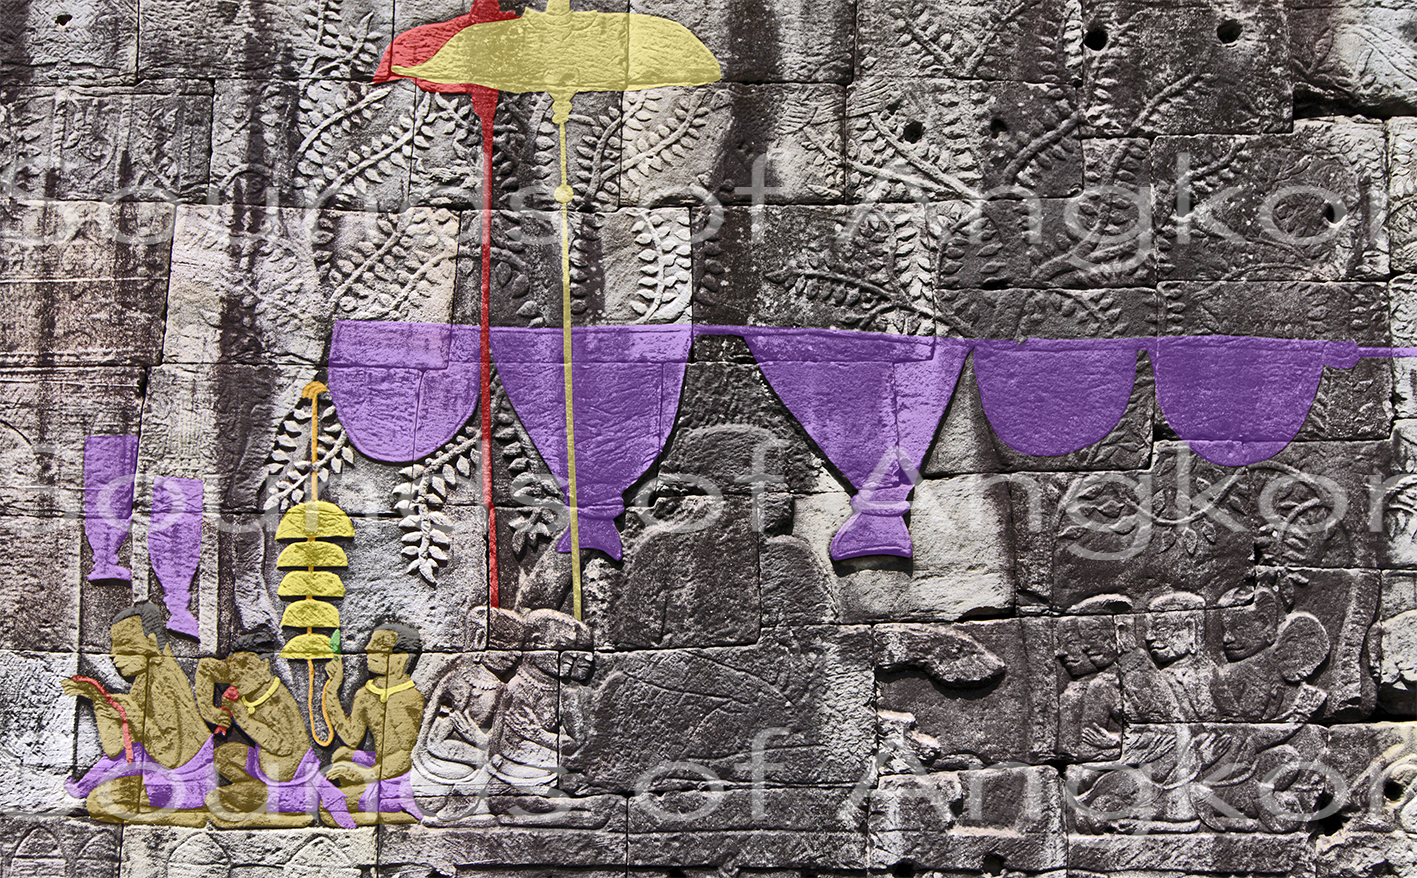 Hanging bell tree. Enlarged scene. Bayon, south outer gallery, east bay. Colorized.